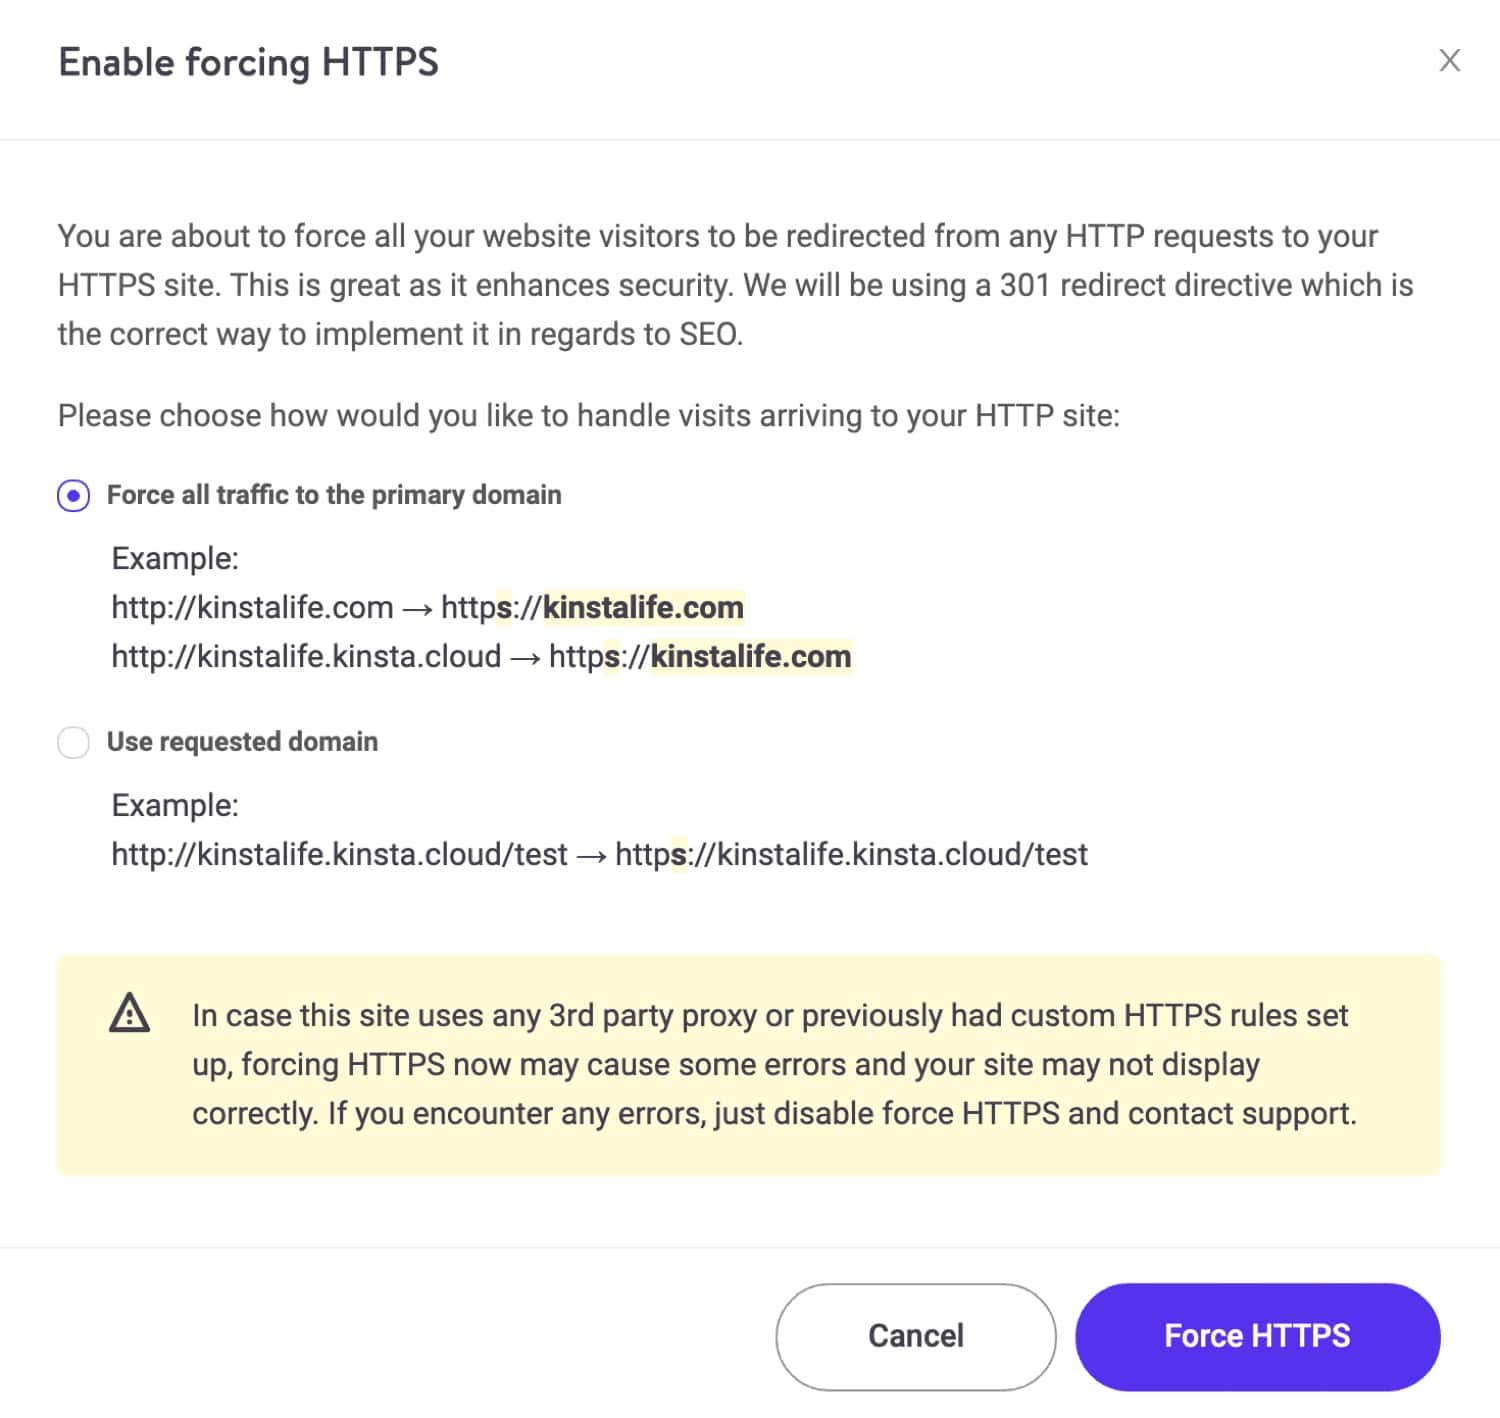 Force HTTPS options